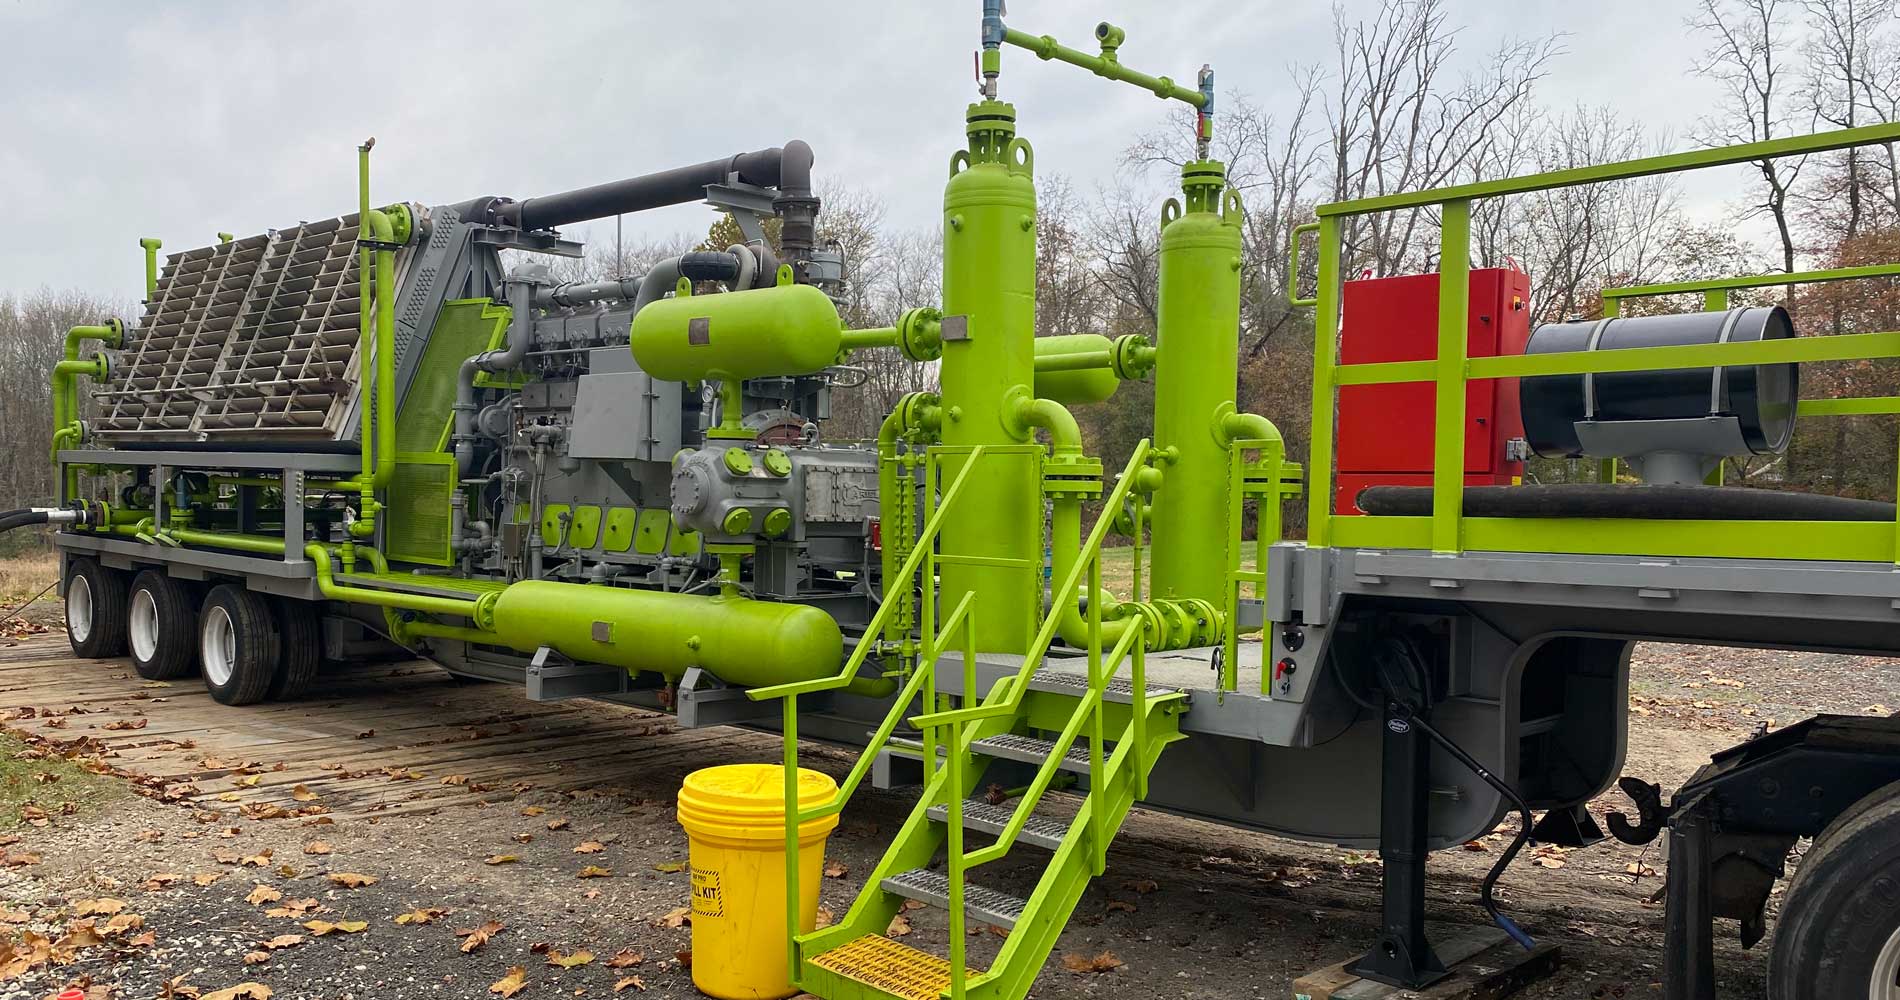 Point Compression Solutions | Natural Gas Recompression Services